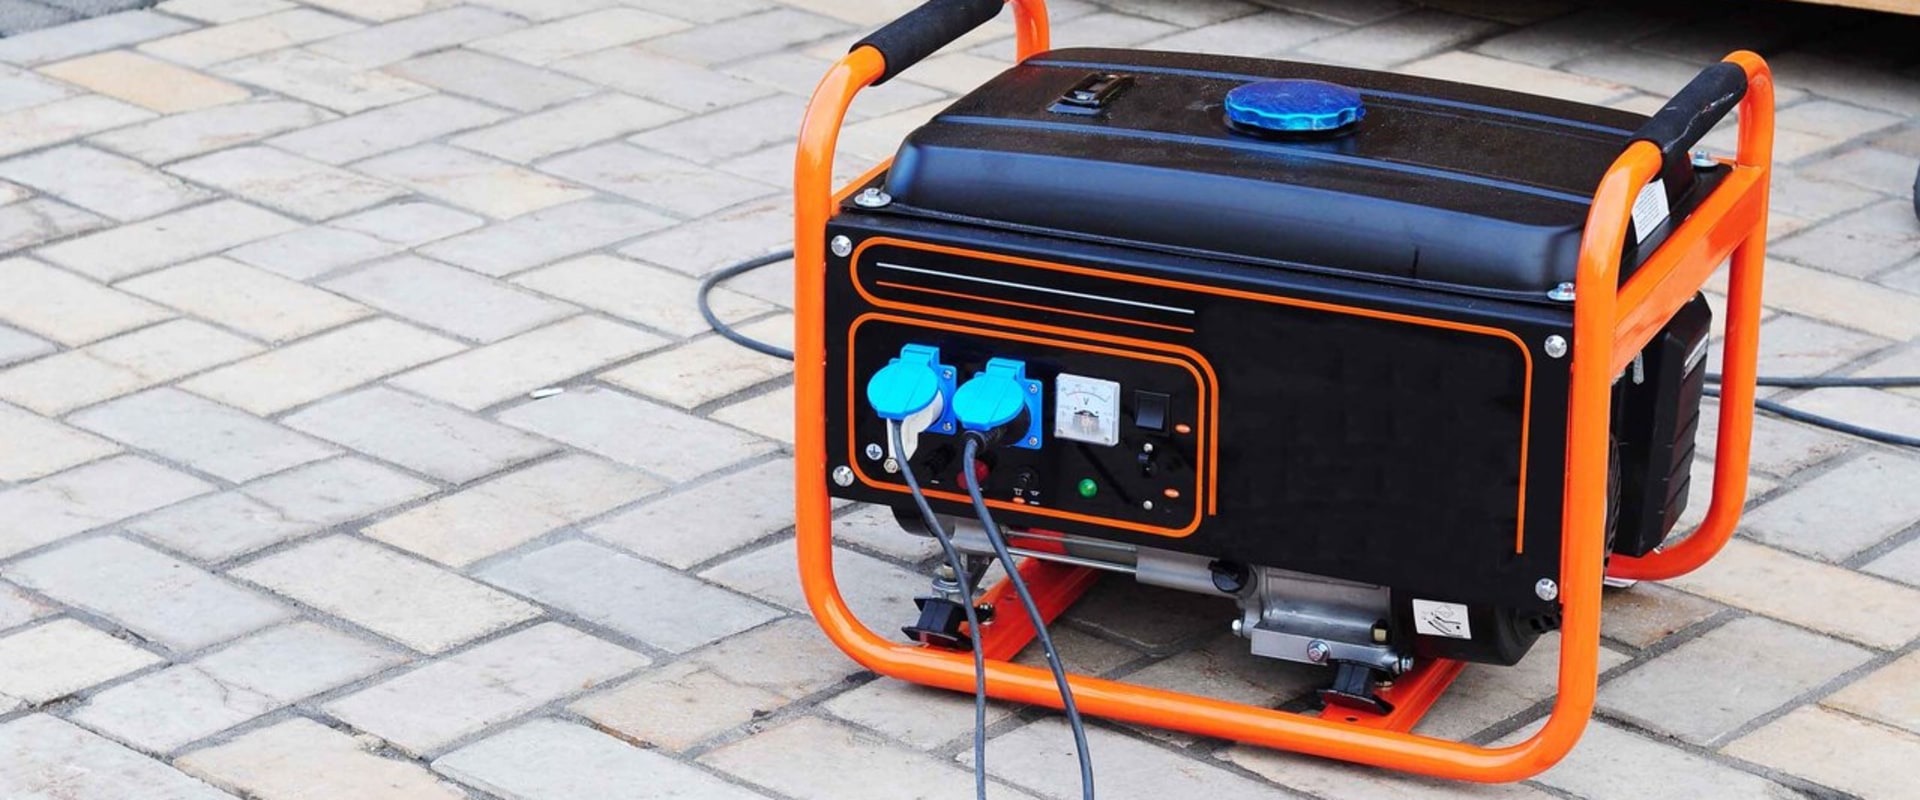 How to Calculate the Power of a Generator for Home Use